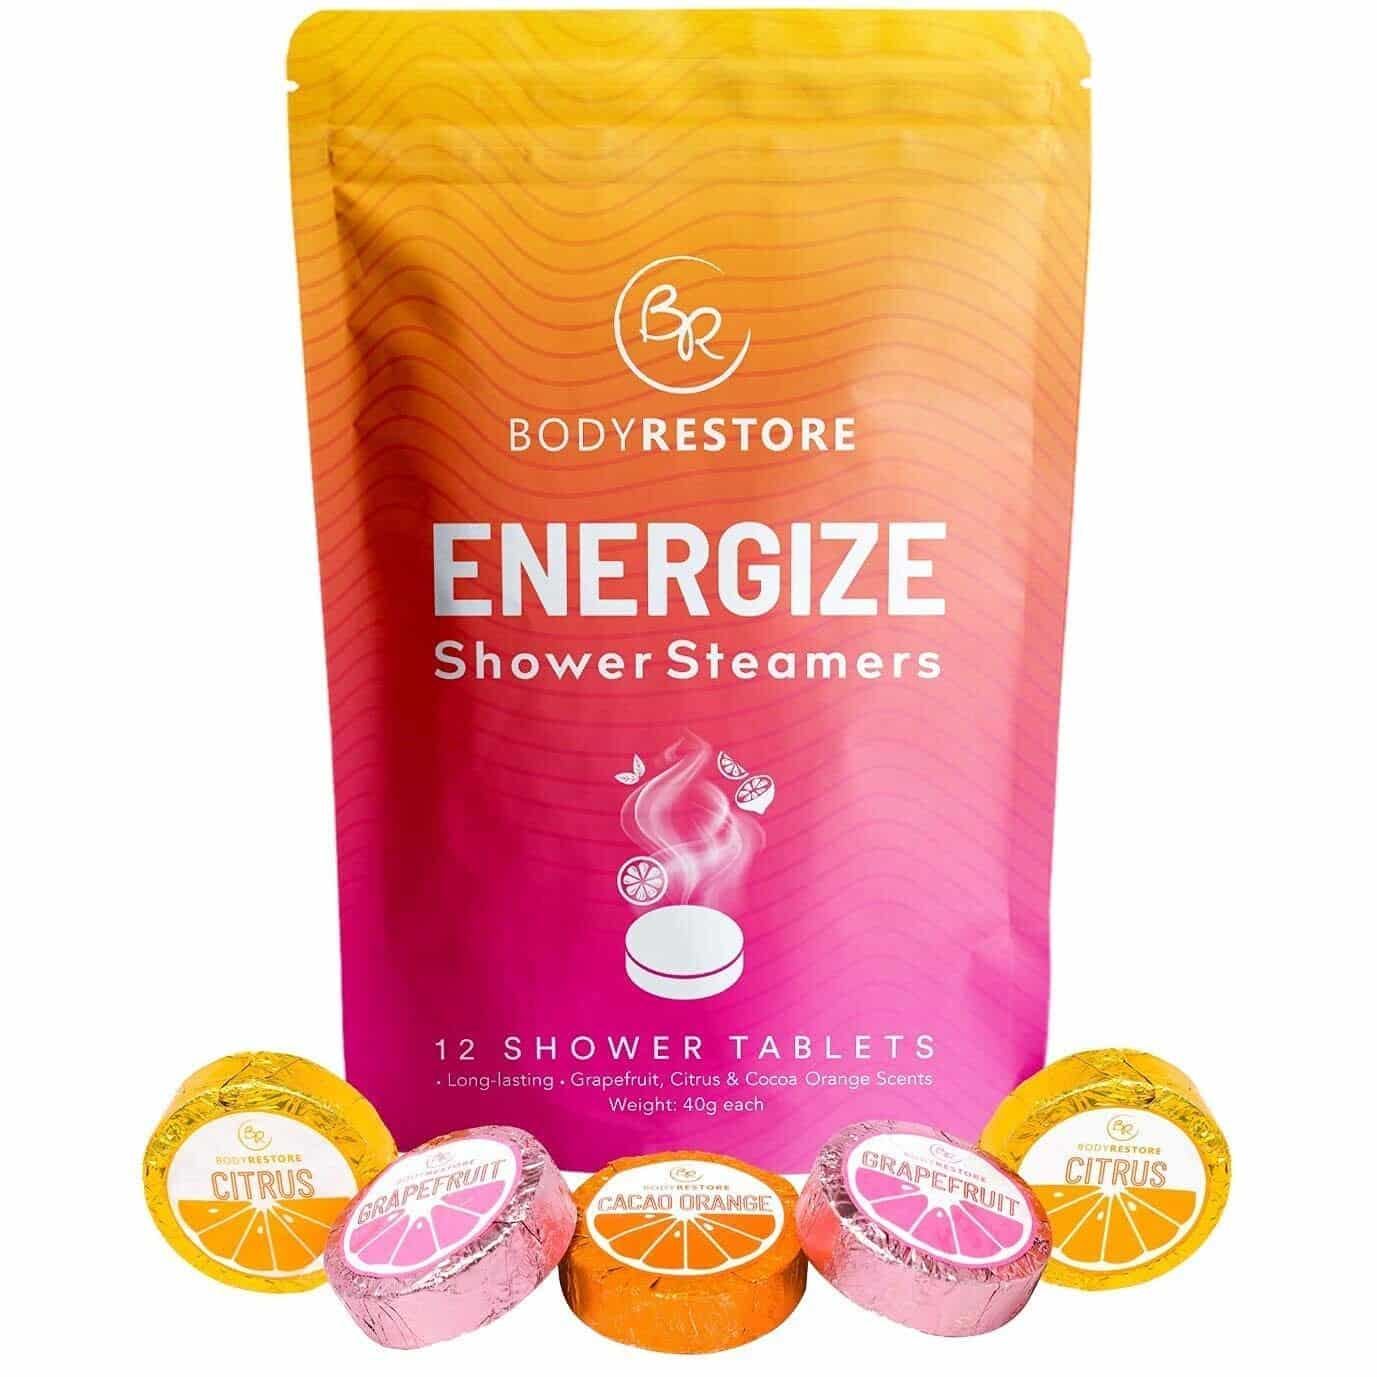 A picture of a bag of shower steamers